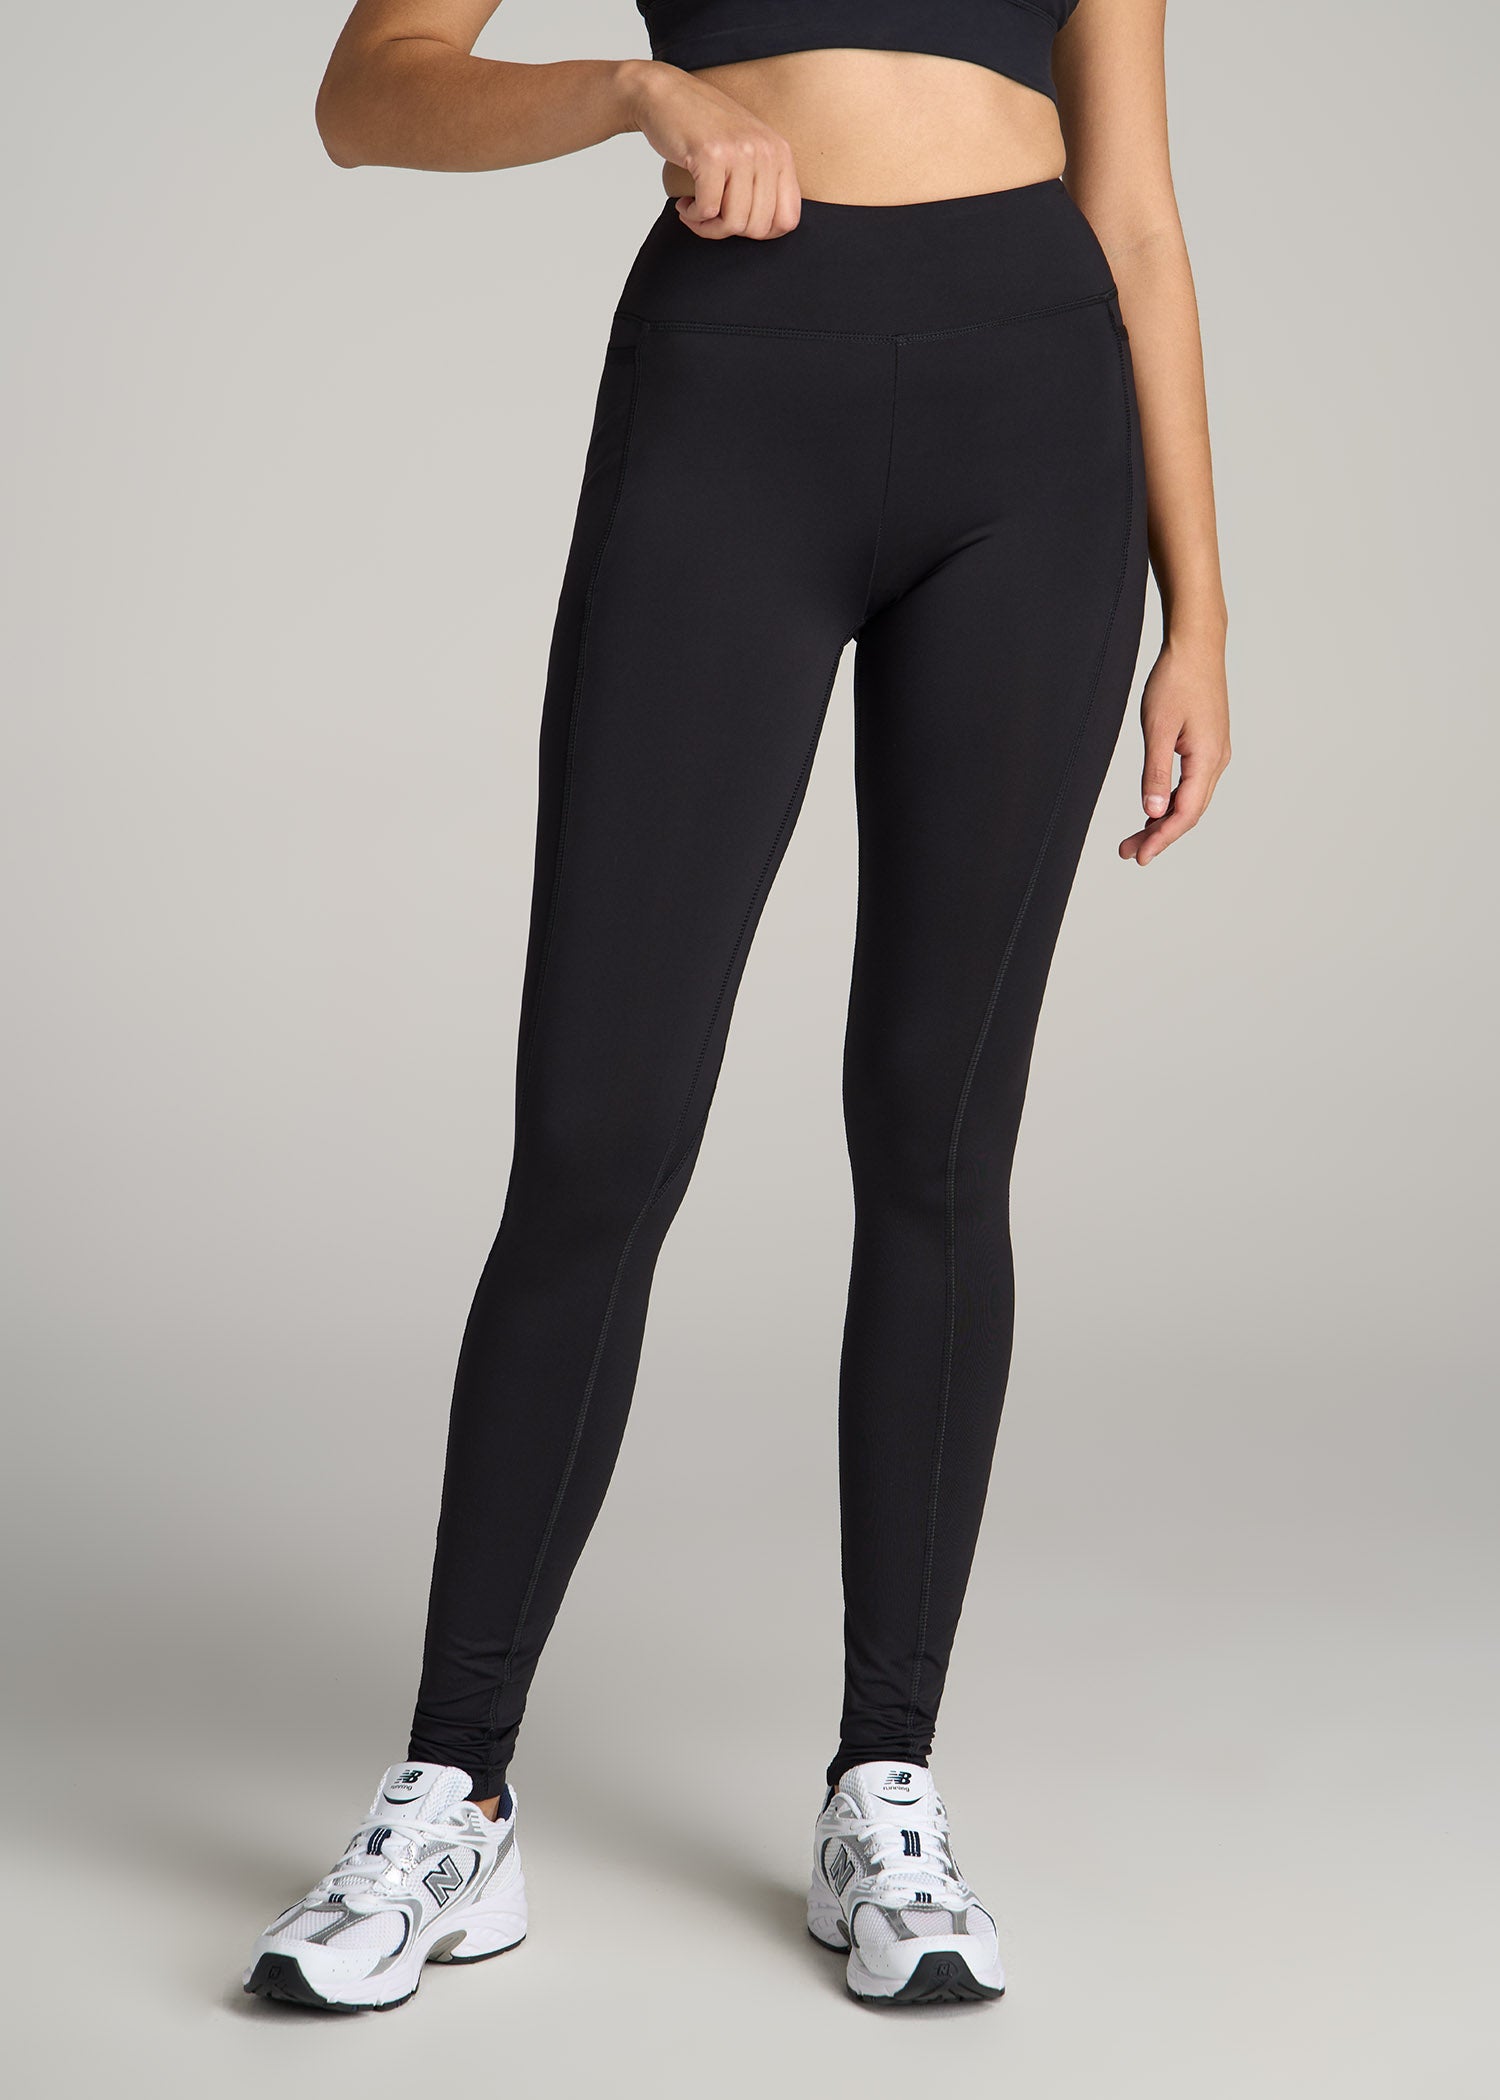 Leggings Fitted Medium Cut ACTIVE FUNCTIONAL made of organic